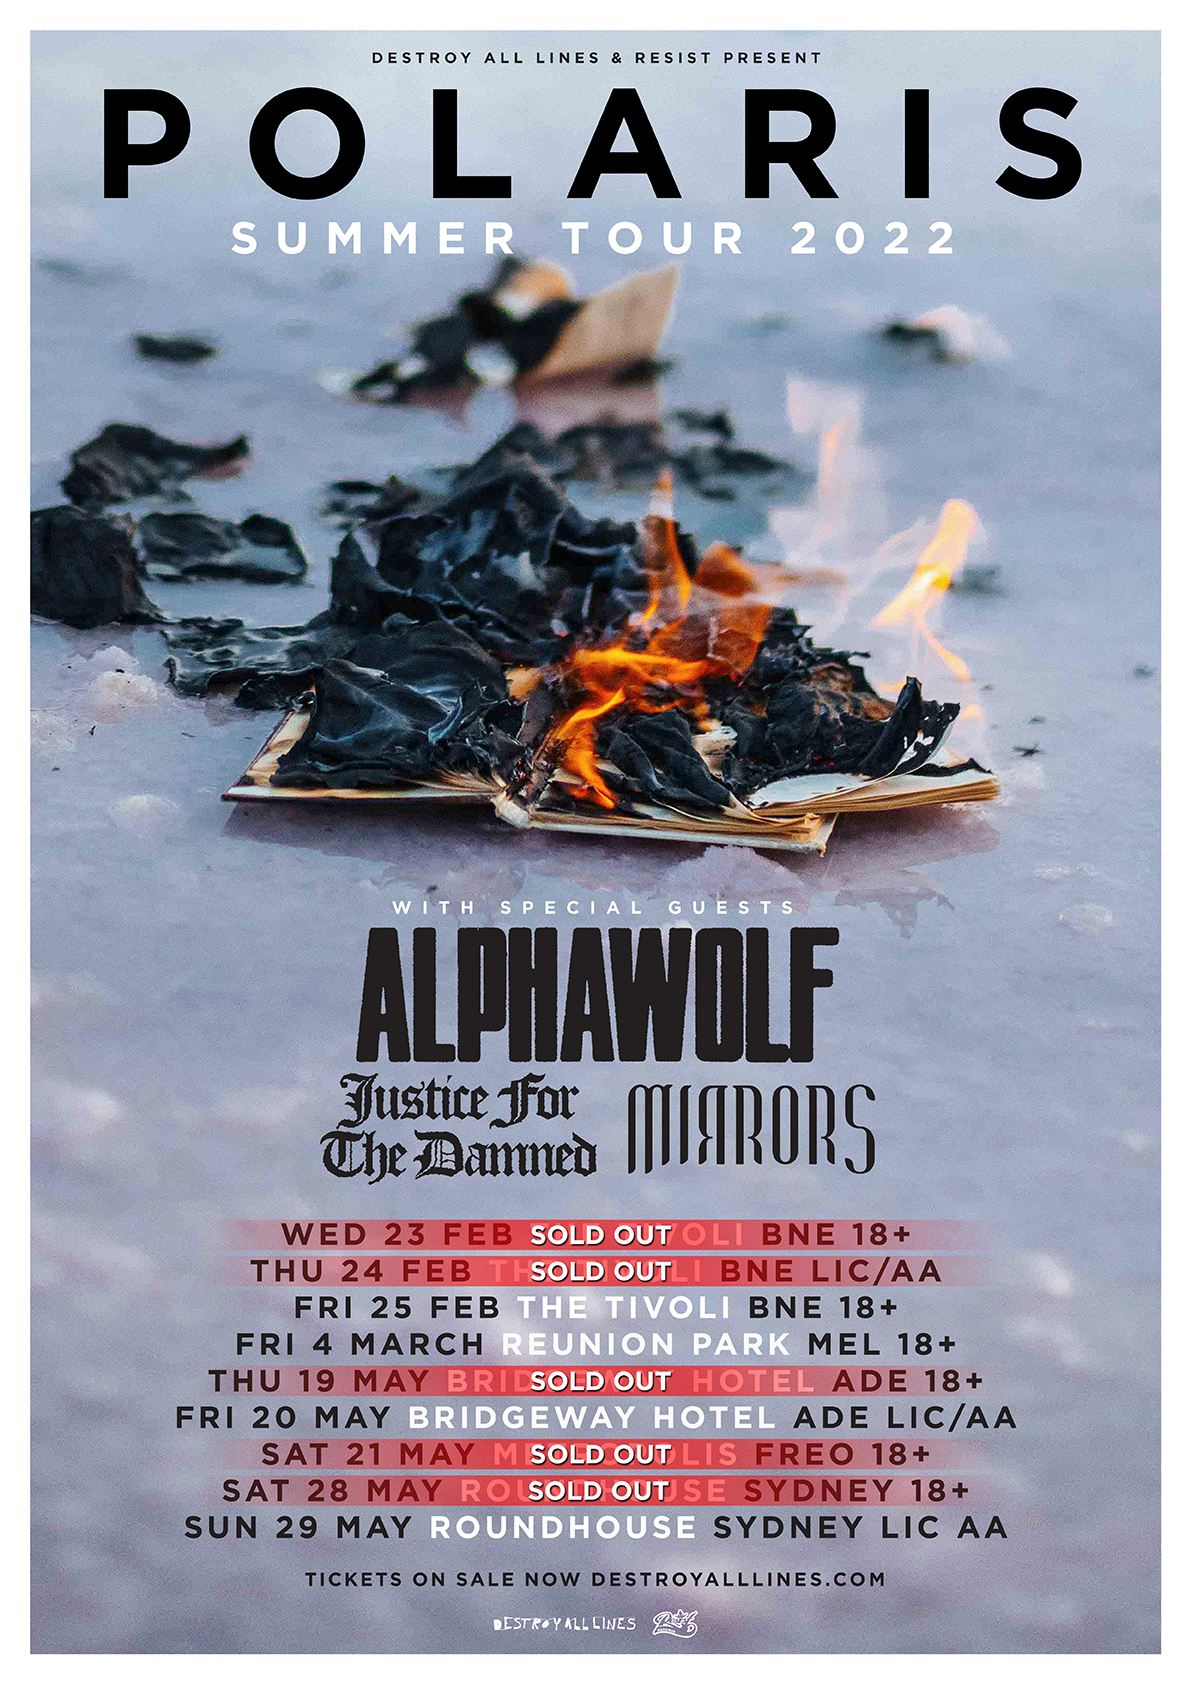 ALPHA WOLF REPLACE MAKE THEM SUFFER ON POLARIS’ UPCOMING SUMMER TOUR